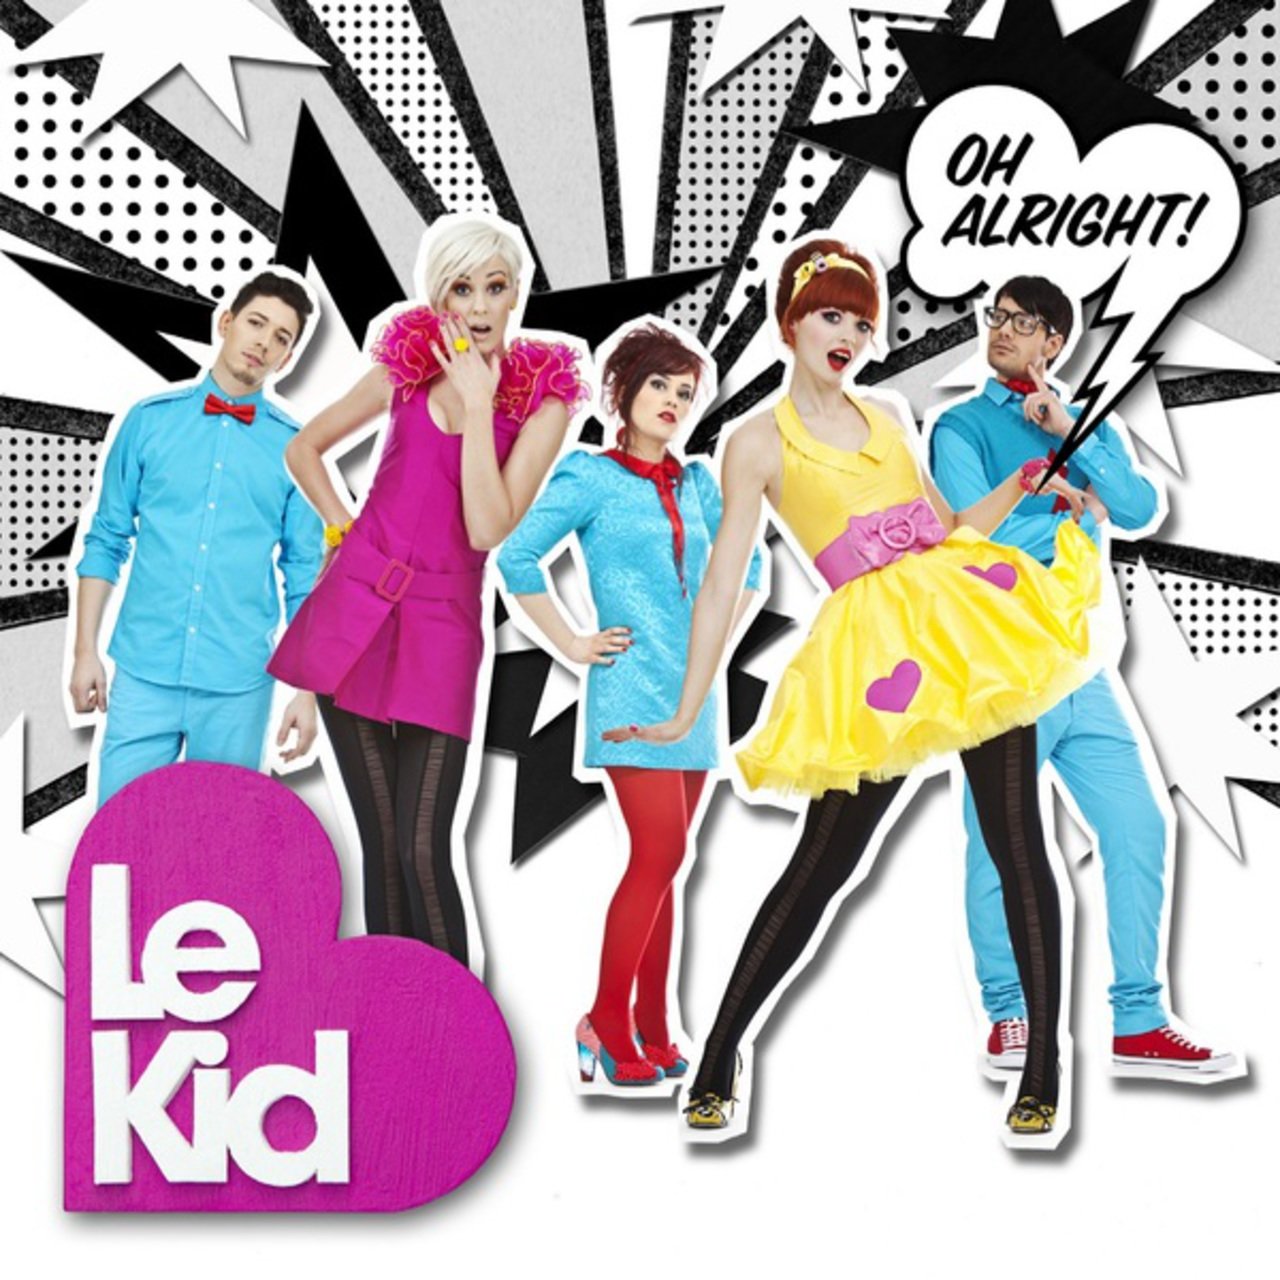 Le Kid Oh Alright! cover artwork